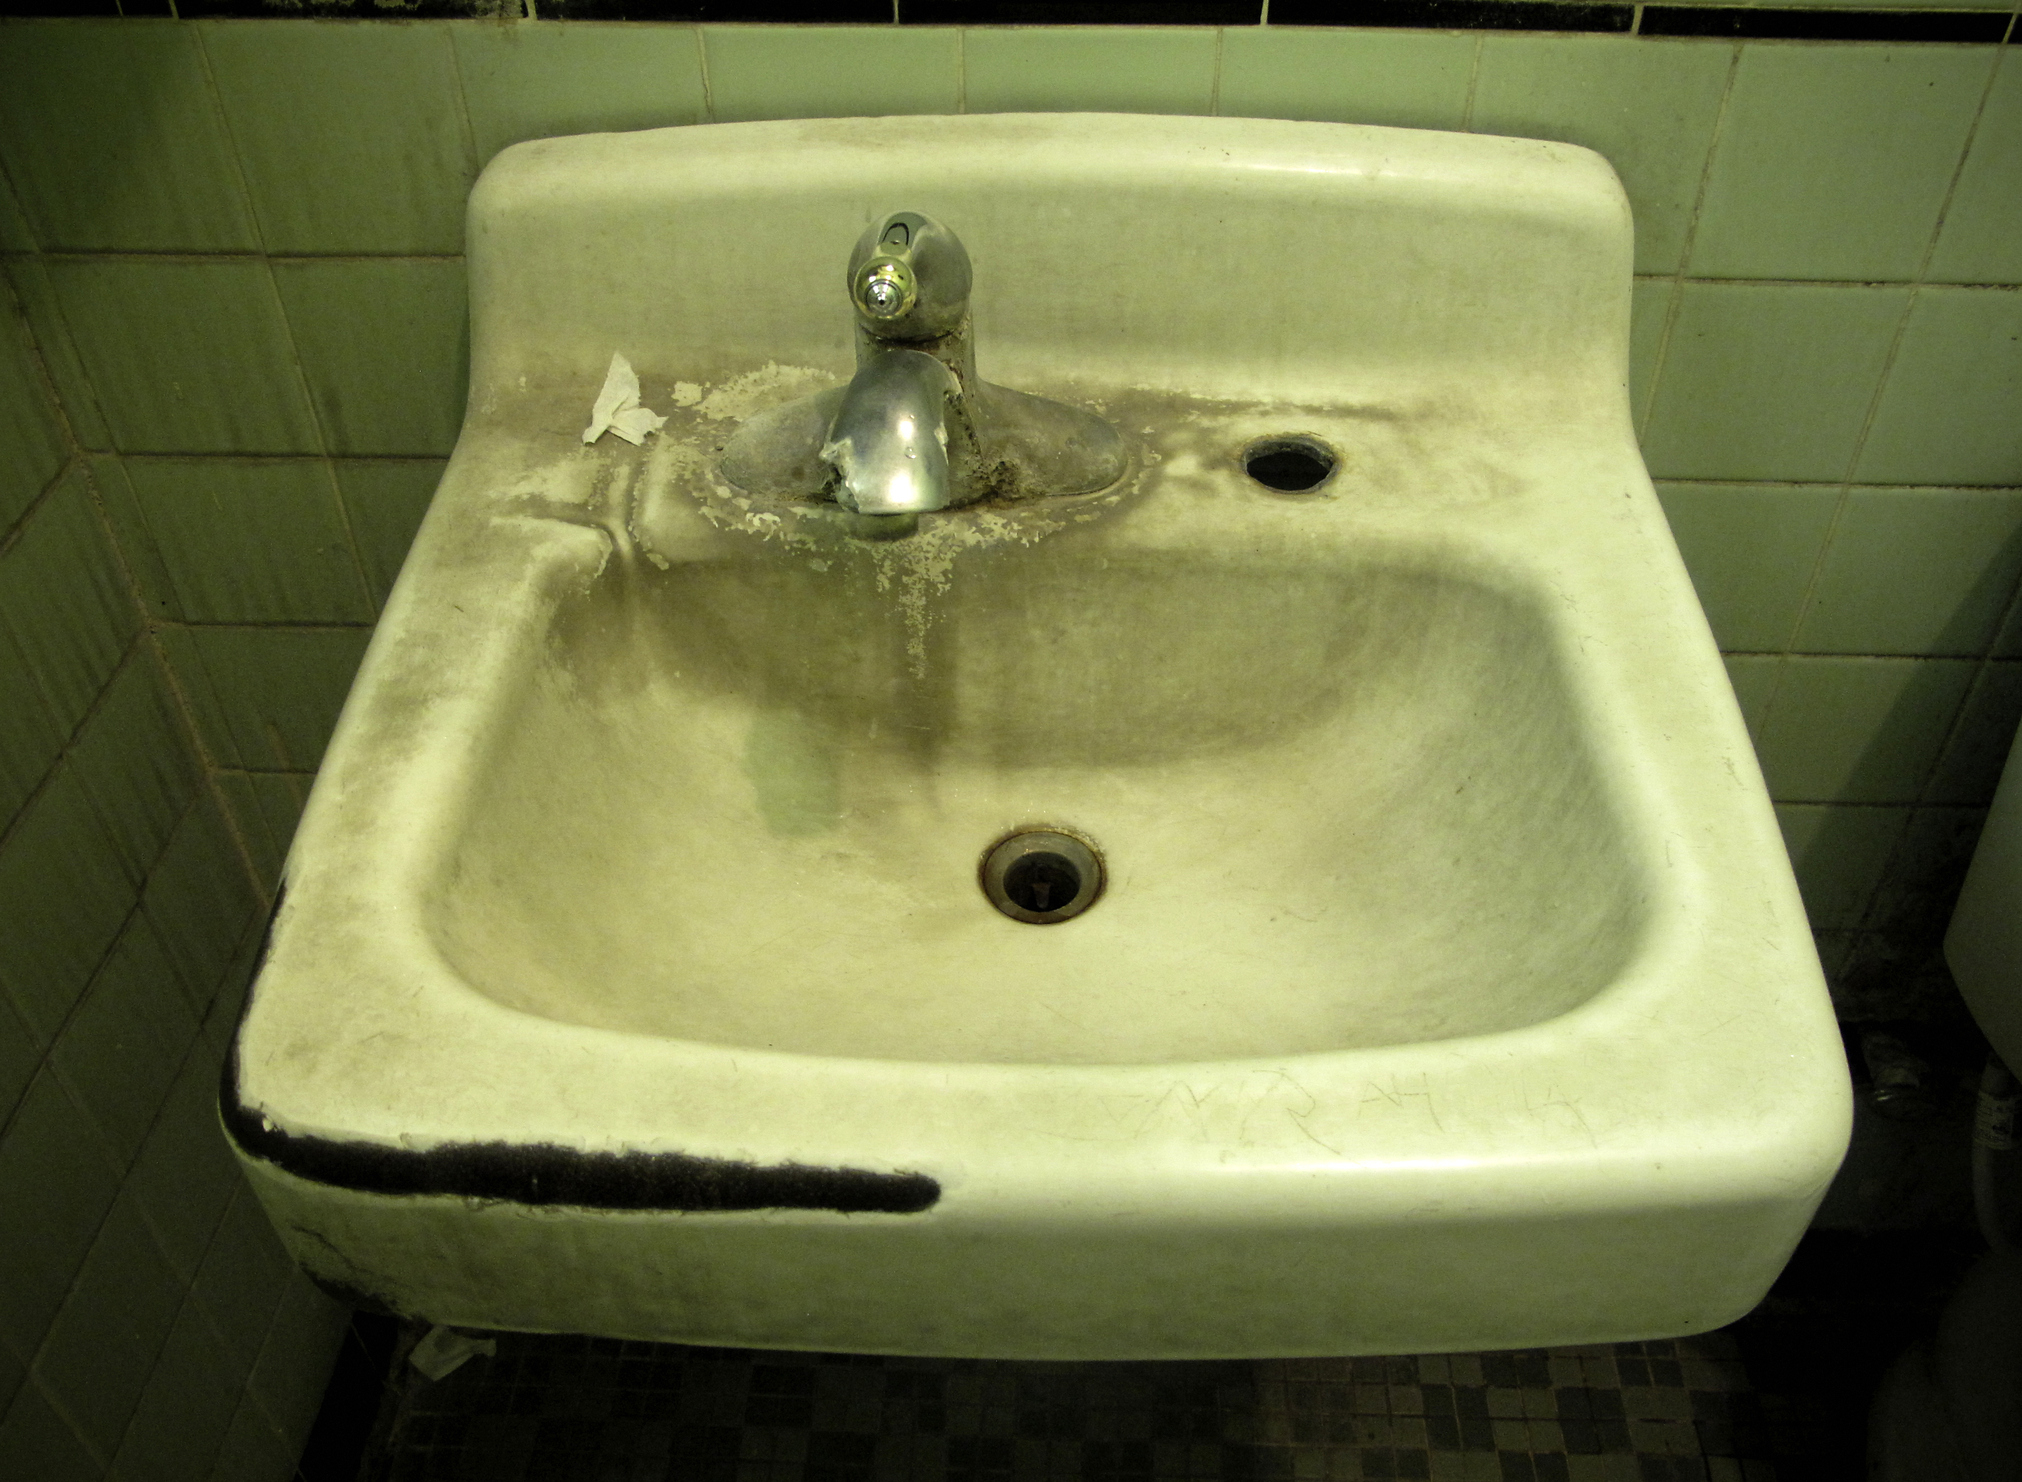 A neglected bathroom sink with visible stains and soap residue